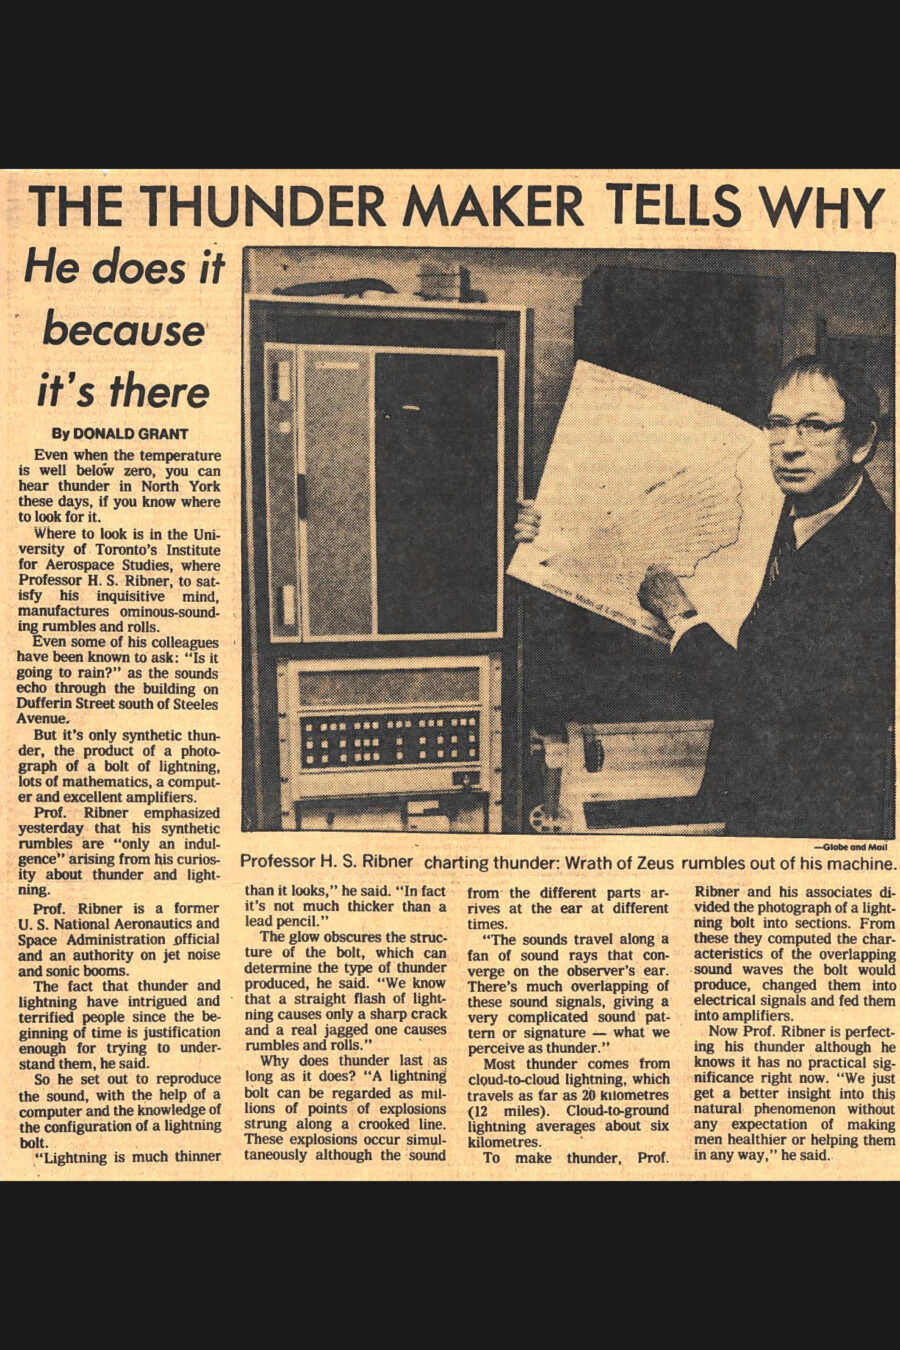 Newspaper clipping from The Globe and Mail, January 17, 1979
Headline: The Thunder Maker Tells Why: He does it because it’s there
Byline: Donald Grant.
Photo: A man in suit and tie holds a chart with angular waves on it, standing before a large computer.
Caption: Professor H.S. Ribner charting thunder: Wrath of Zeus rumbles out of his machine.
Even when the temperature is well below zero, you can hear thunder in North York these days, if you know where to look for it.
Where to look is in the University of Toronto’s Institute for Aerospace Studies, where Professor H.S. Ribner, to satisfy his inquisitive mind, manufactures ominous-sounding rumbles and rolls. Even some of his colleagues have been known to ask: “Is it going to rain?” as the sounds echo through the building on Dufferin Street south of Steeles Avenue. But it’s only synthetic thunder, the product of a photograph of a bolt of lightning, lots of mathematics, a computer and excellent amplifiers.
Professor Ribner emphasized yesterday that his synthetic rumbles are “only an indulgence” arising from his curiosity about thunder and lightning. Professor Ribner is a former United States National Aeronautics and Space Administration official and an authority on jet noise and sonic booms. The fact that thunder and lightning have intrigued and terrified people since the beginning of time is justification enough for trying to understand them, he said. So he set out to reproduced the sound, with the help of a computer and the knowledge of the configuration of a lightning bolt.
“Lighting is much thinner than it looks,” he said. “In fact it is not much thicker than a lead pencil.” The glow obscures the structure of the bolt, which can determine they type of thunder produced, he said. “We know that a straight flash of lightning causes only a sharp crack and a real jagged one causes rumbles and rolls.” Why does thunder last as long as it does? “A lightning bolt can be regarded as millions of points of explosions strung along a crooked line. These explosions occur simultaneously although the sound from the different parts arrives at the ear at different times. The sounds travel along a fan of sound rays that converge on the observer’s ear. There’s much overlapping of these sounds signals, giving a very complicated sound pattern or signature – what we perceive as thunder.”
Most thunder comes from cloud-to-cloud lightning, which travels as far as twenty kilometres (twelve miles). Cloud-to-ground lightning averages about six kilometres.
To make thunder, Professor Ribner and his associates divided the photograph of a lightning bolt into sections. From these they computed the characteristics of the overlapping sound waves the bolt would produce, changed them into electrical signals and fed them into amplifiers. Now Professor Ribner is perfecting his thunder although he knows it has no practical significance right now. “We just get a better insight into this natural phenomenon without any expectation of making men healthier or helping them in any way,” he said.